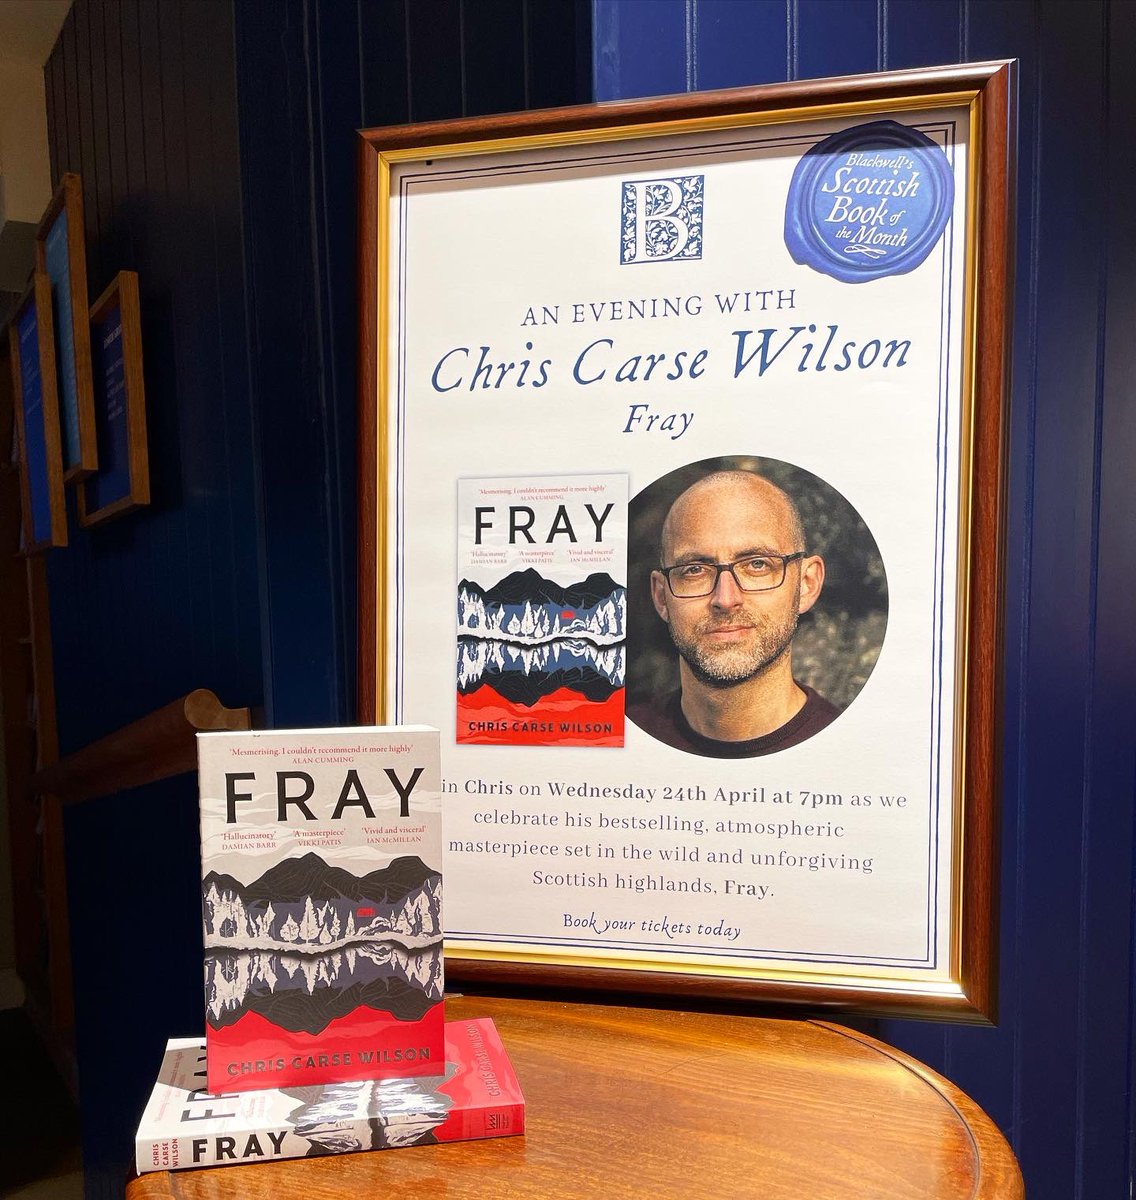 Join @chriscarsewilso on Wednesday 24th April at 7pm as we celebrate the paperback publication of his hallucinatory, atmospheric masterpiece set in the unforgiving Scottish highlands, Fray- which is also our Scottish Book of the month! Book here - eventbrite.co.uk/e/chris-carse-…